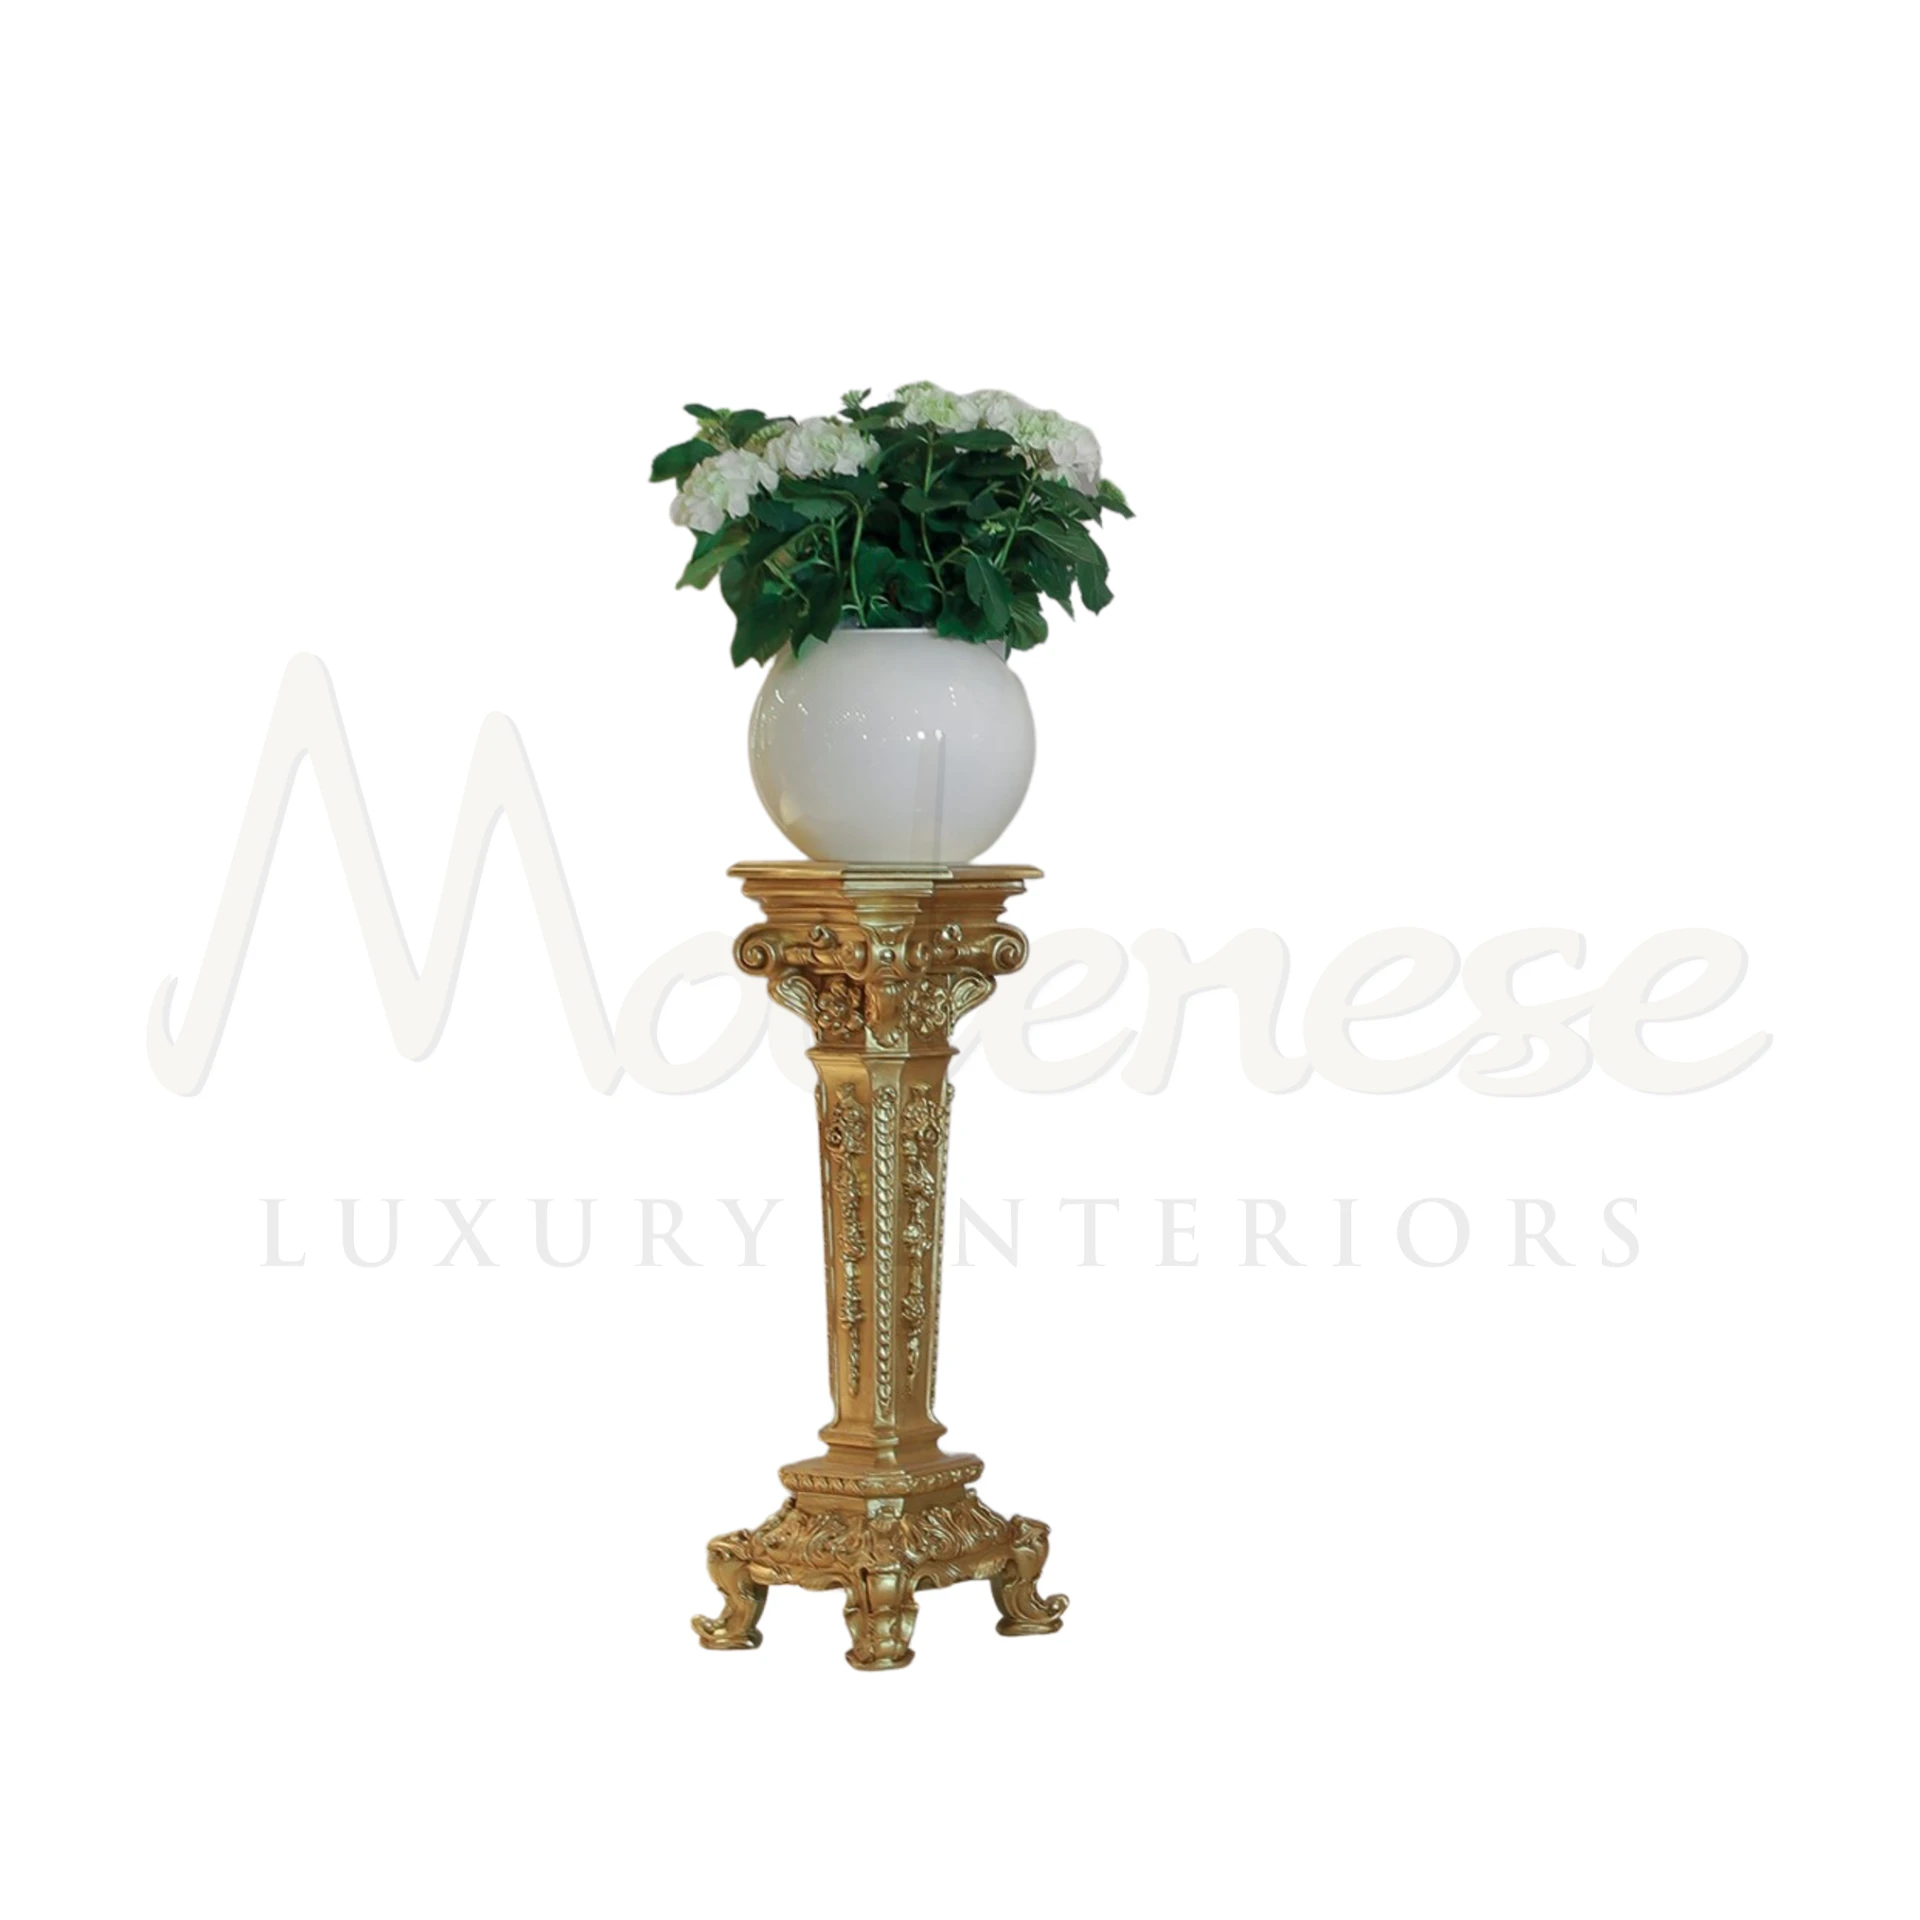 Classical Baroque Furniture Vase Stand, a luxurious piece enhancing interior design with timeless style.